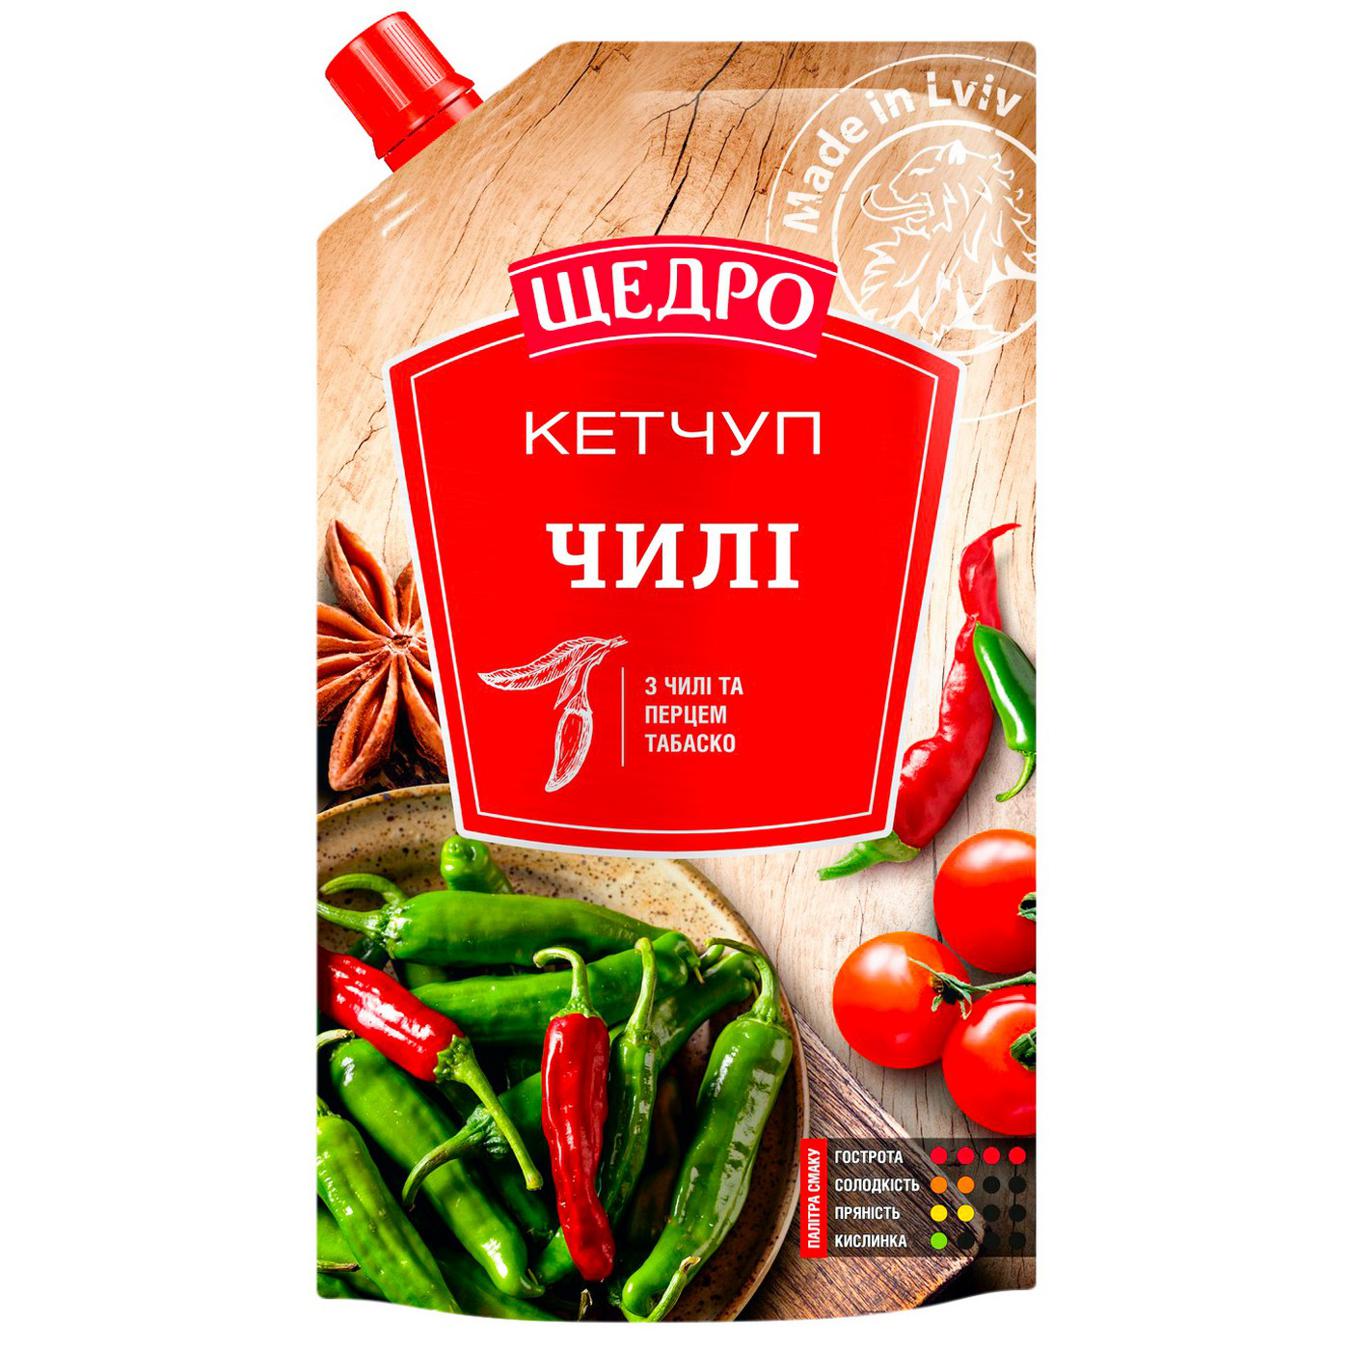 Schedro Chili Ketchup w/ Hot Chili Peppers, 250g